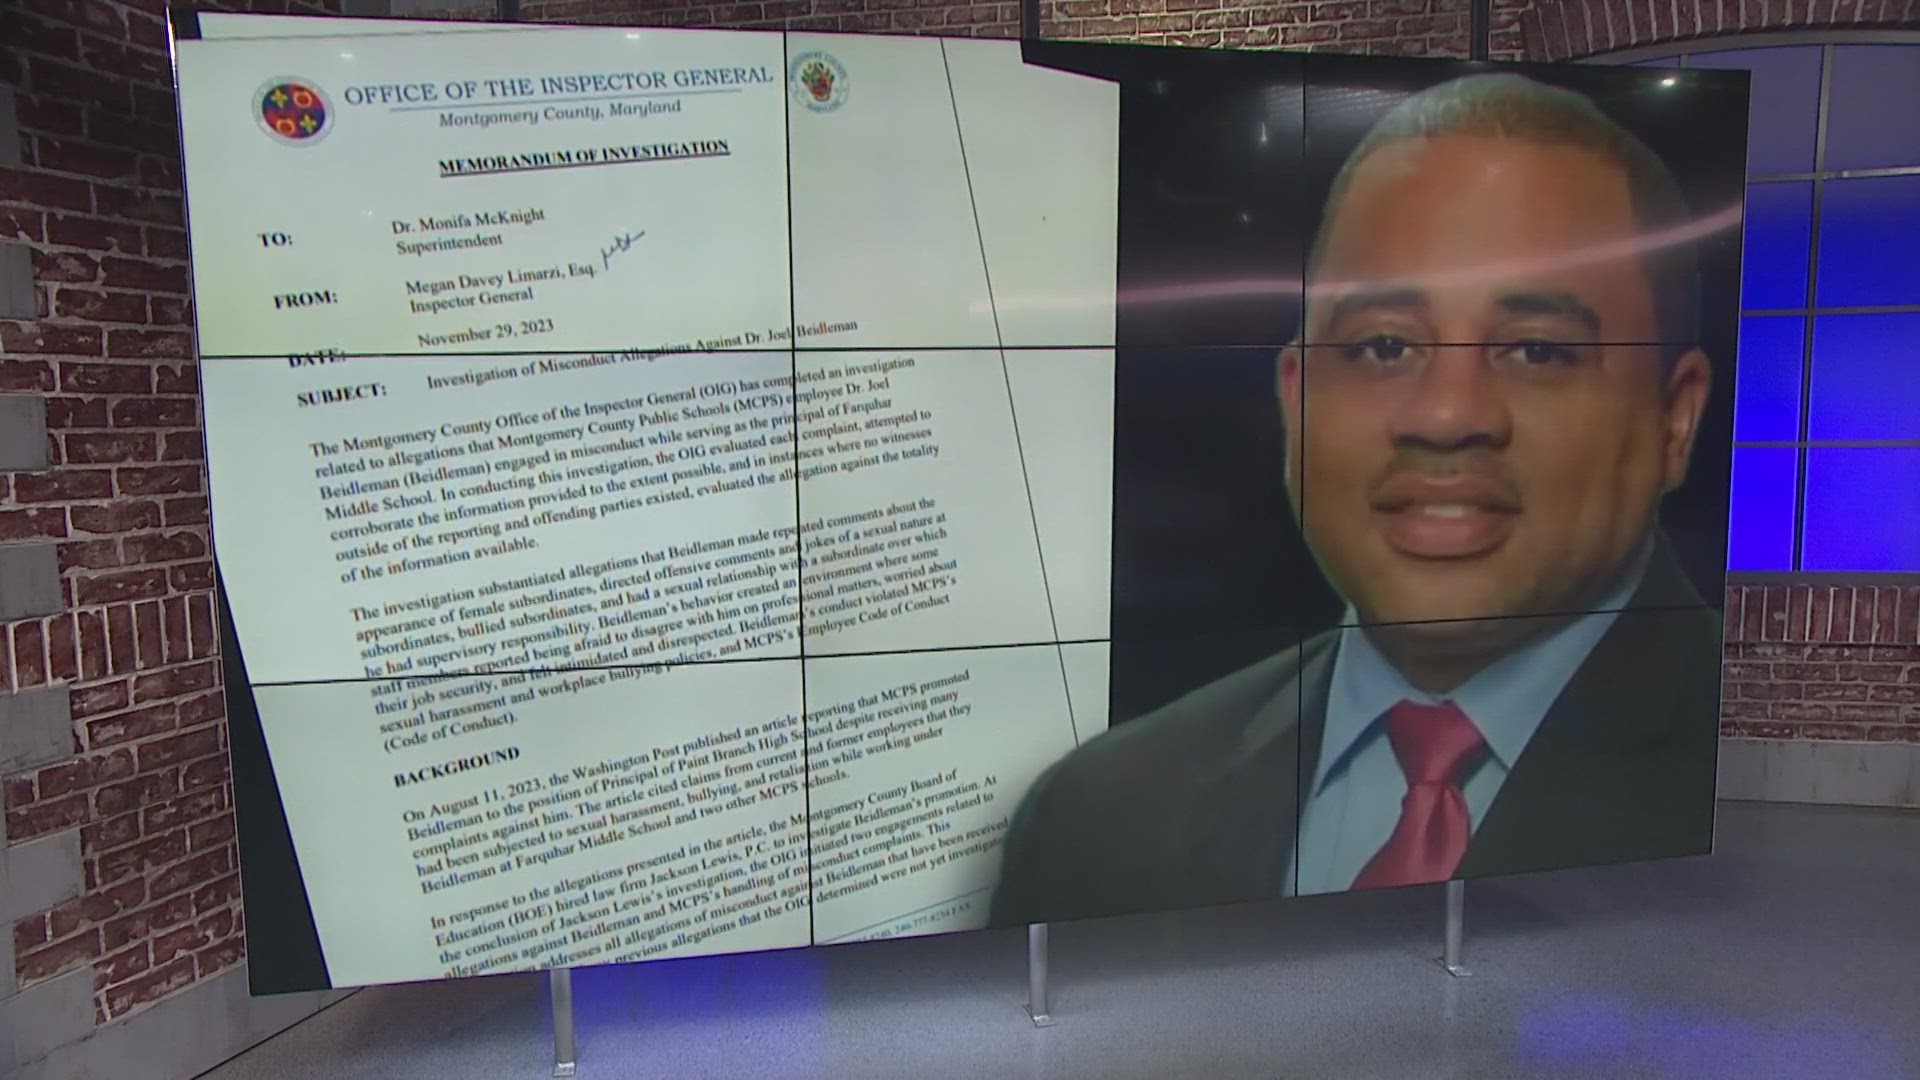 A high school principal accused of sexual harassment and bullying is officially out of a job.